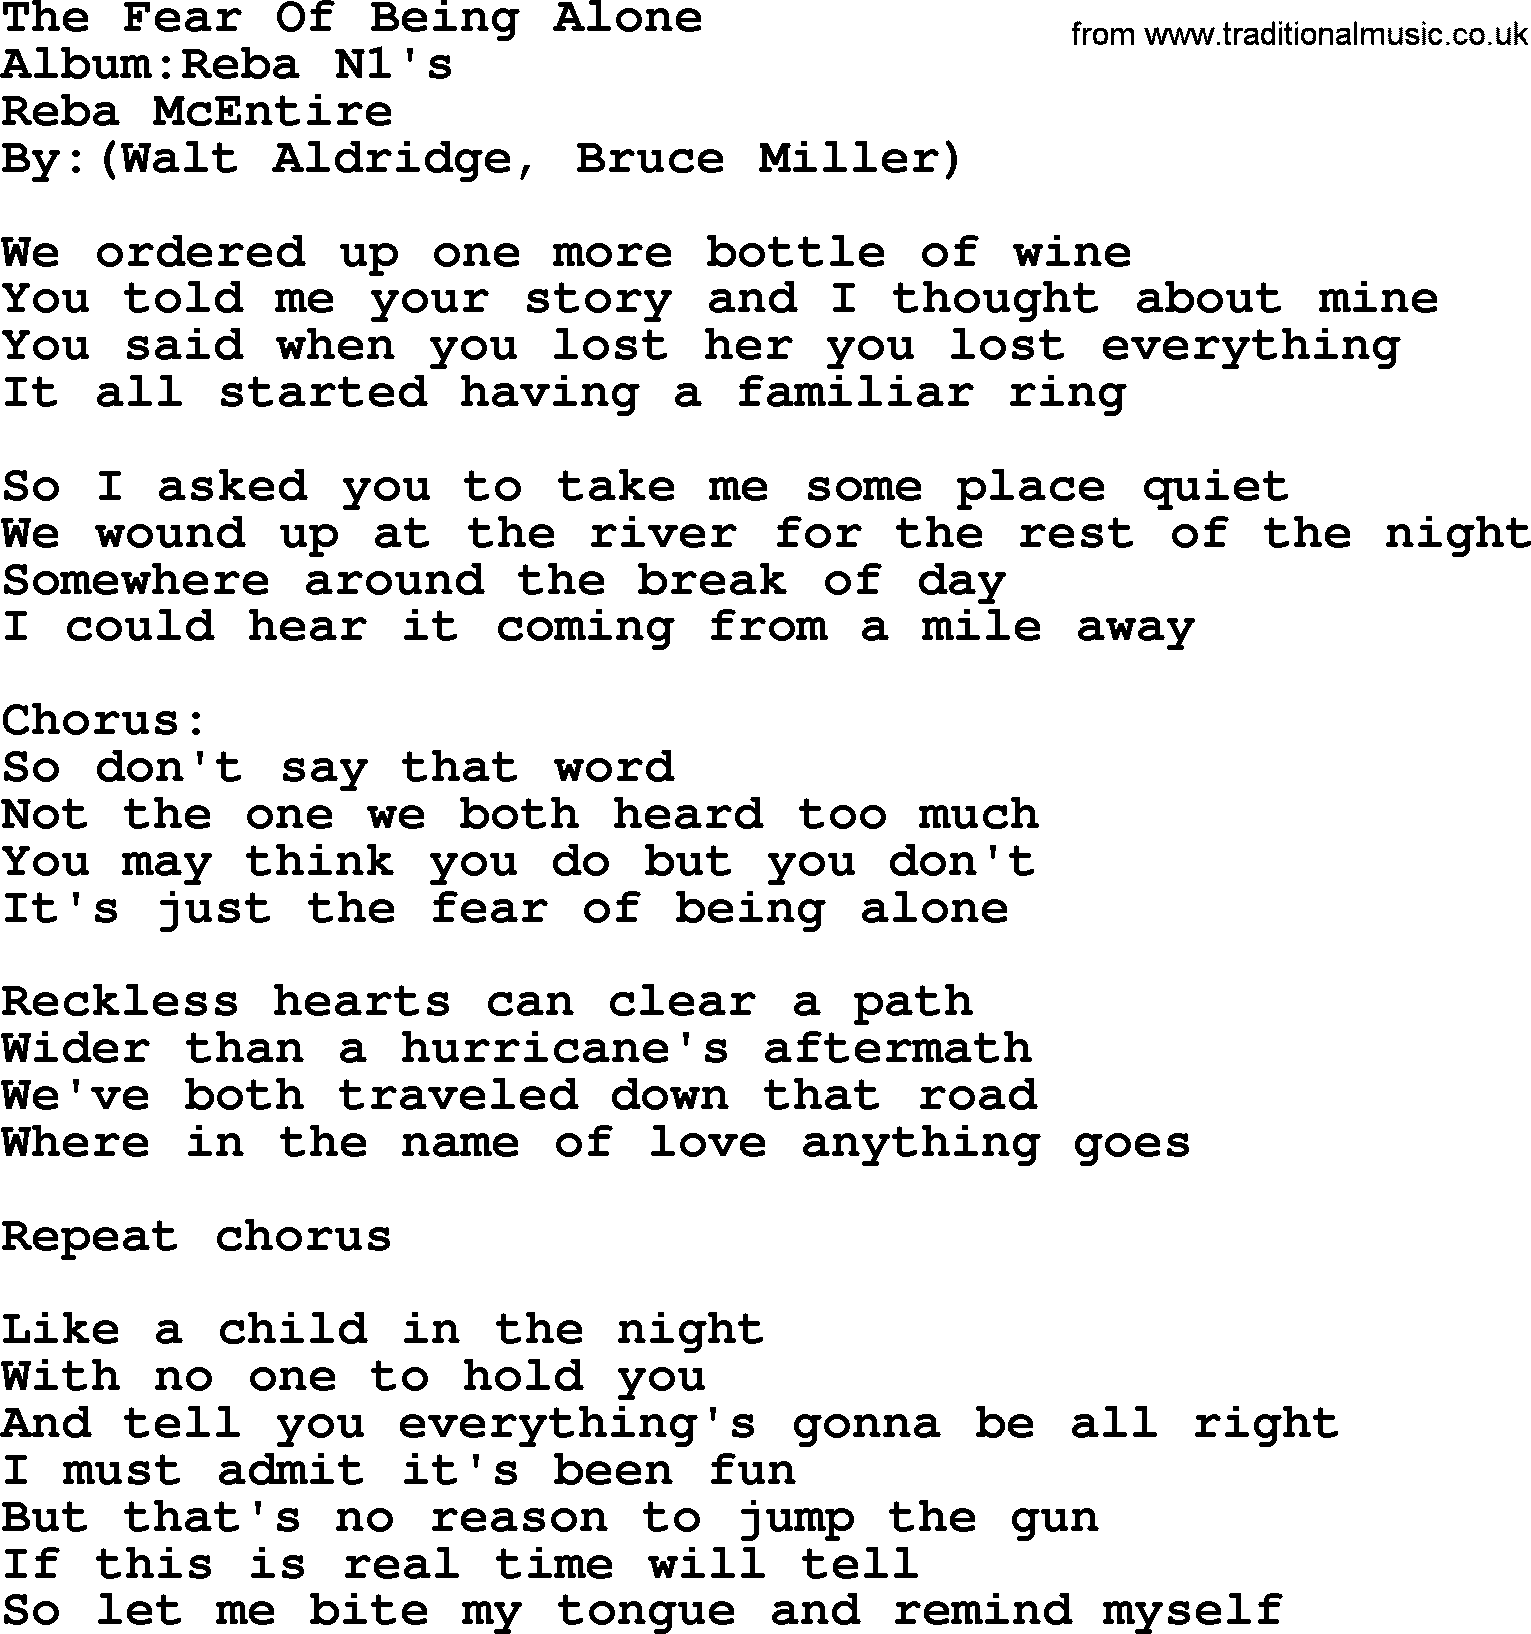 Reba McEntire song: The Fear Of Being Alone lyrics